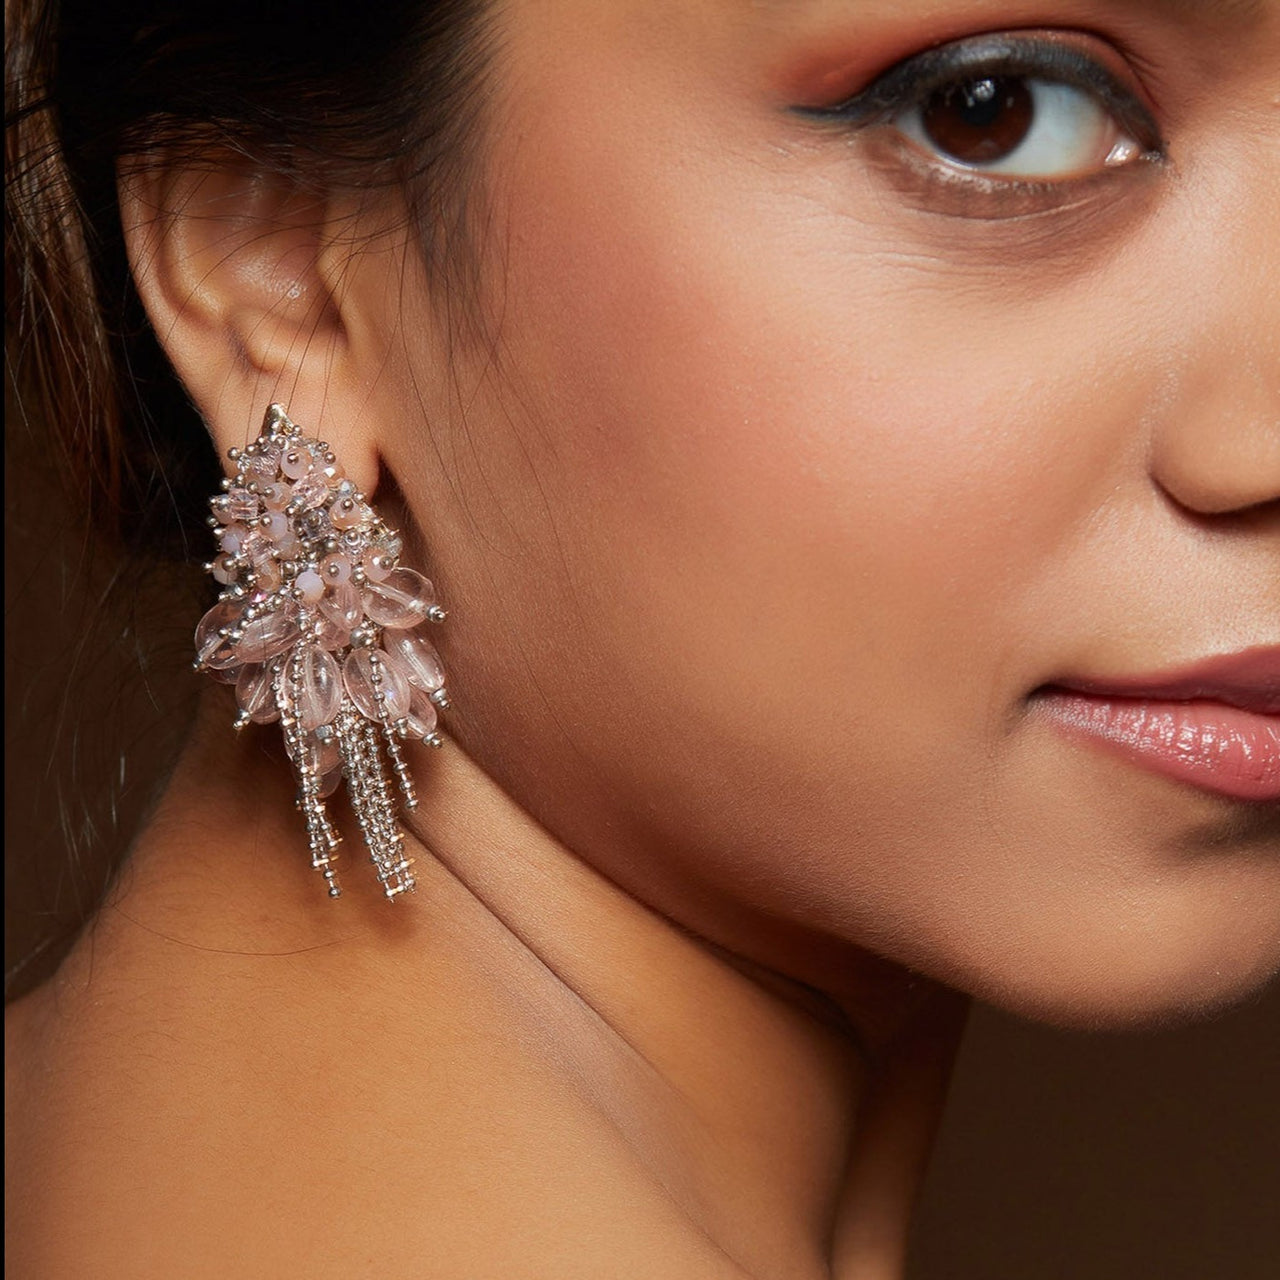 9 Beautiful Pink Earrings in Latest Designs | Styles At Life